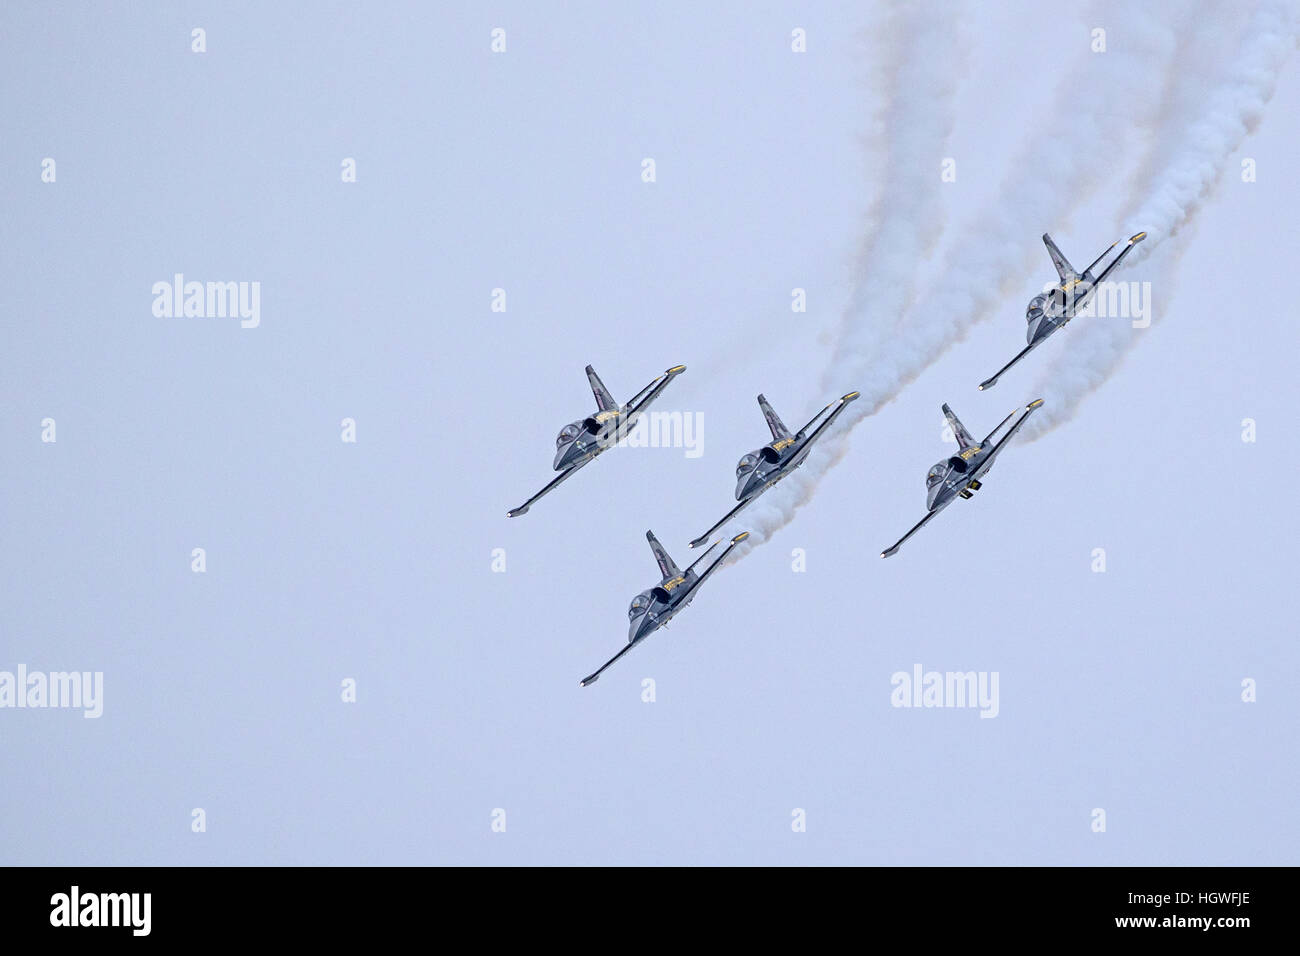 Airplane Breitling Jet Team L-39 Albatross fighters flying at 2016 Huntington Beach Air Show in California Stock Photo